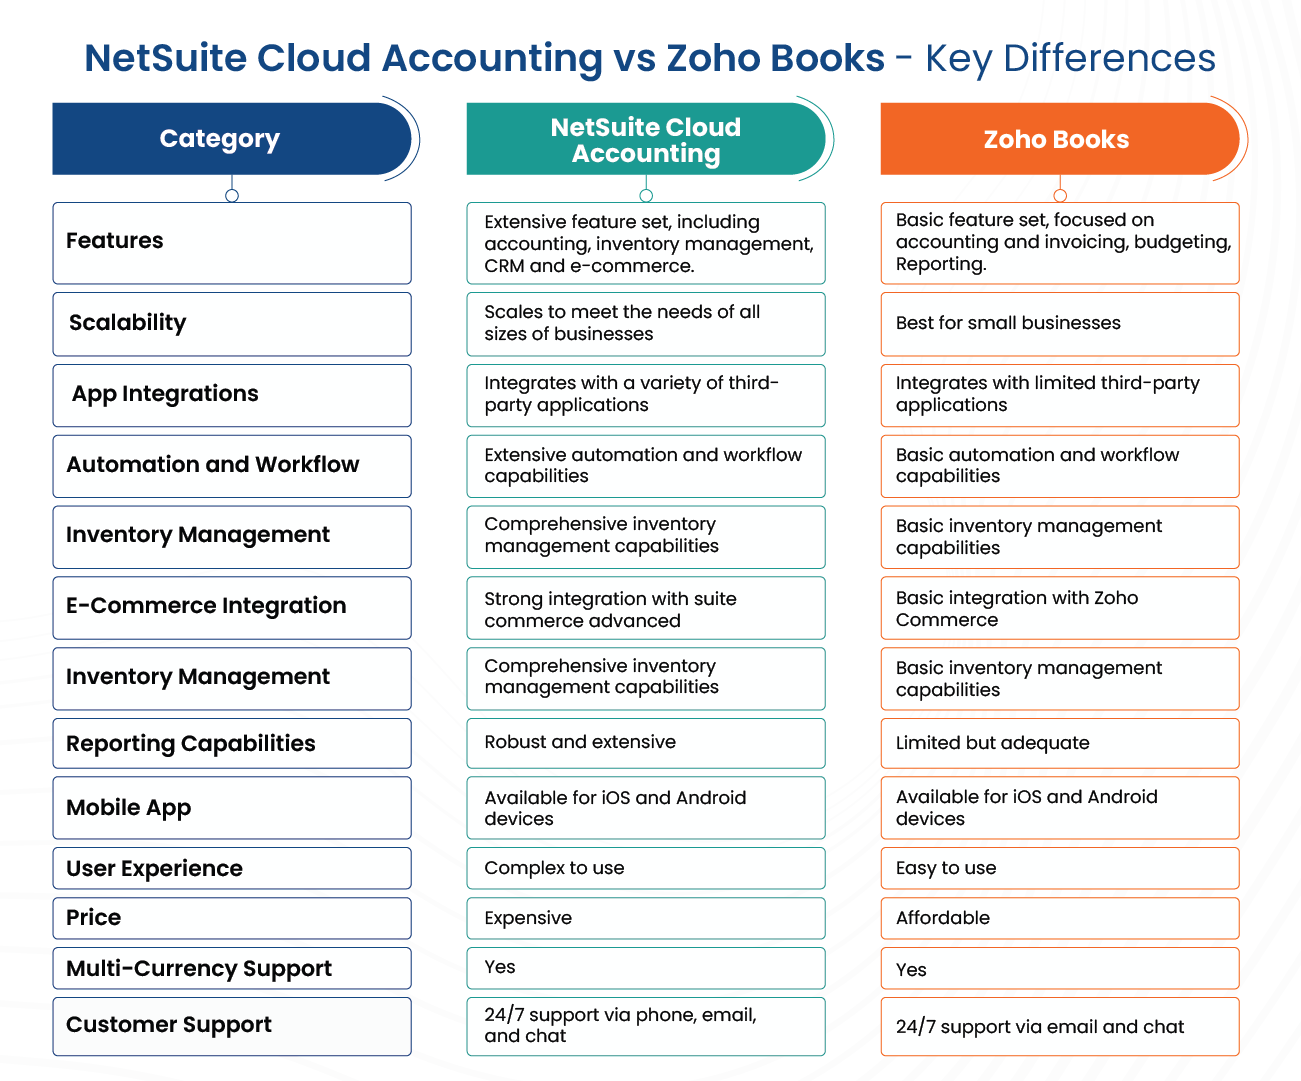 NetSuite Cloud Accounting vs Zoho Books - Key Differences